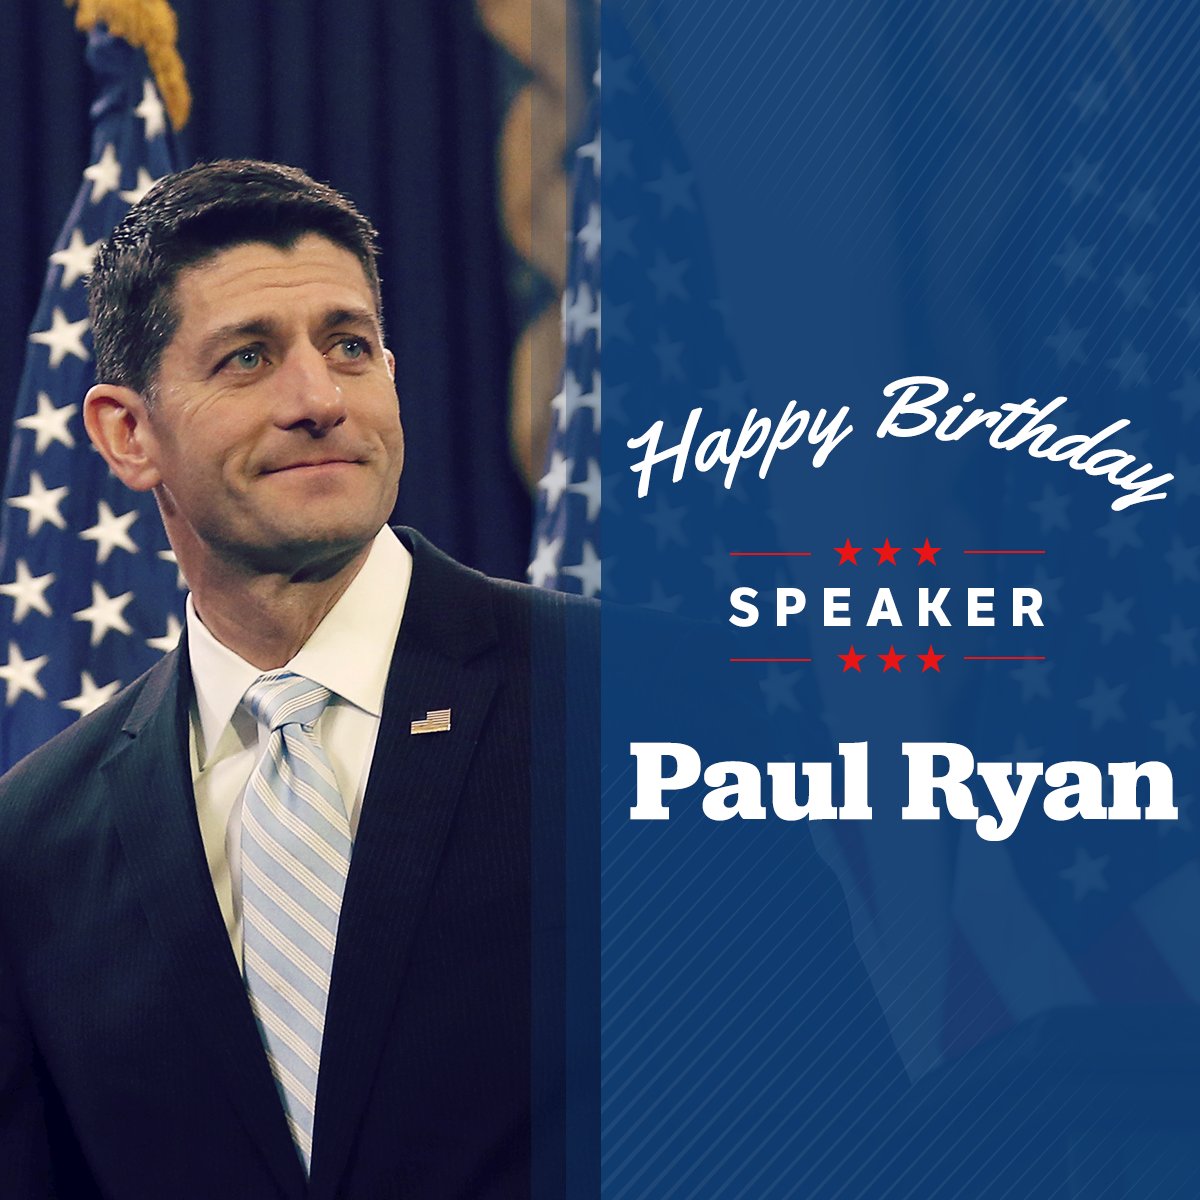 Absolutely!  Happy Bday to the handsome Paul Ryan.    to wish a happy birthday!   